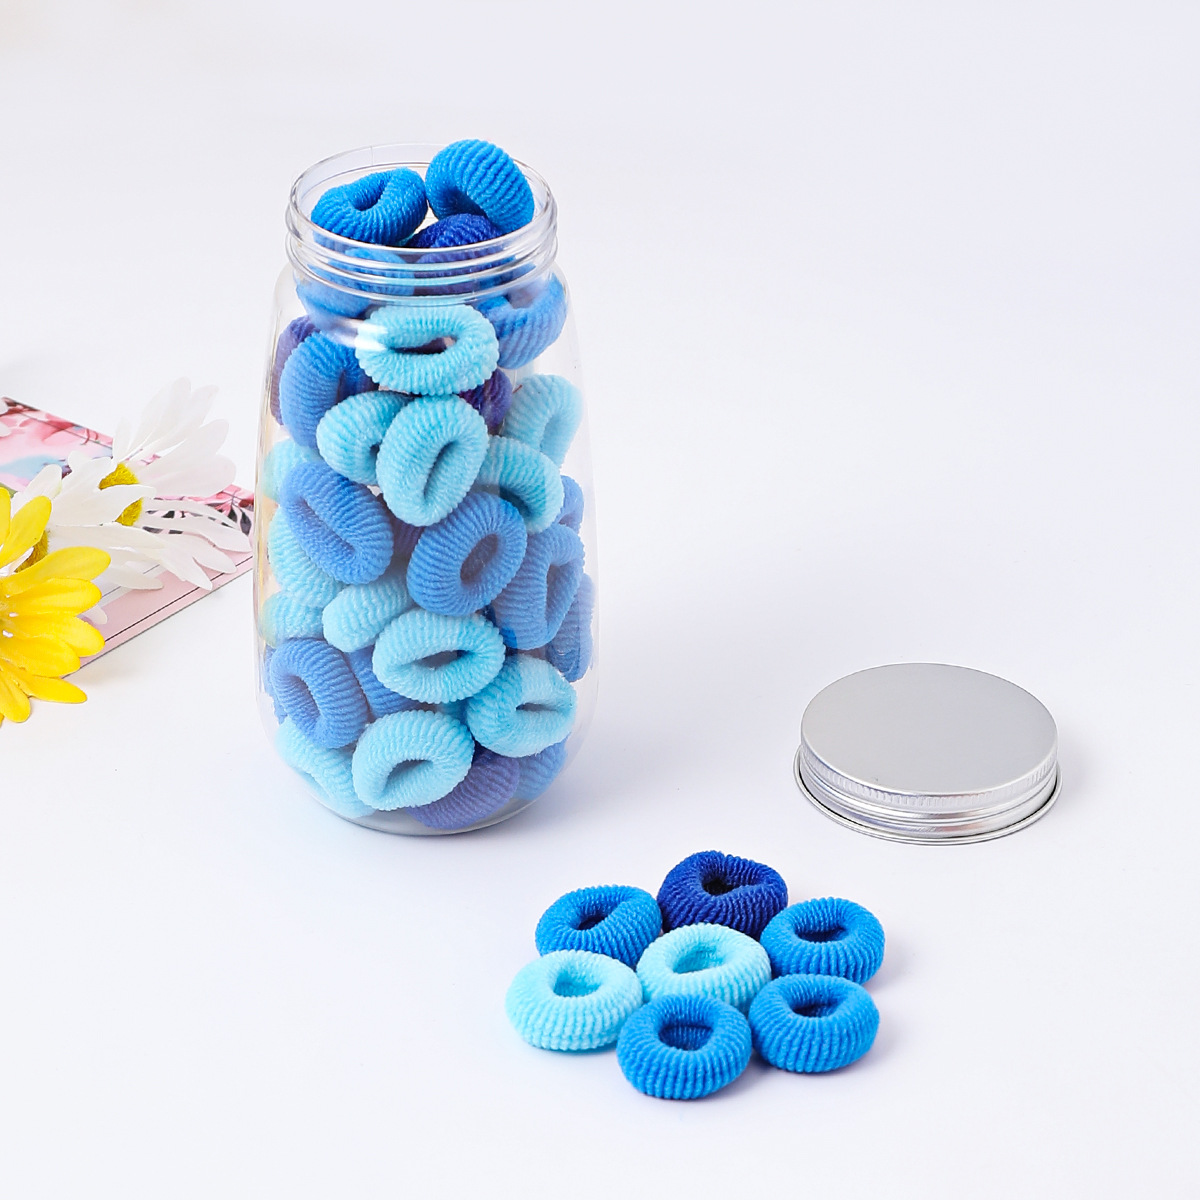 50 cans of blue mixed wide-brimmed towel rings